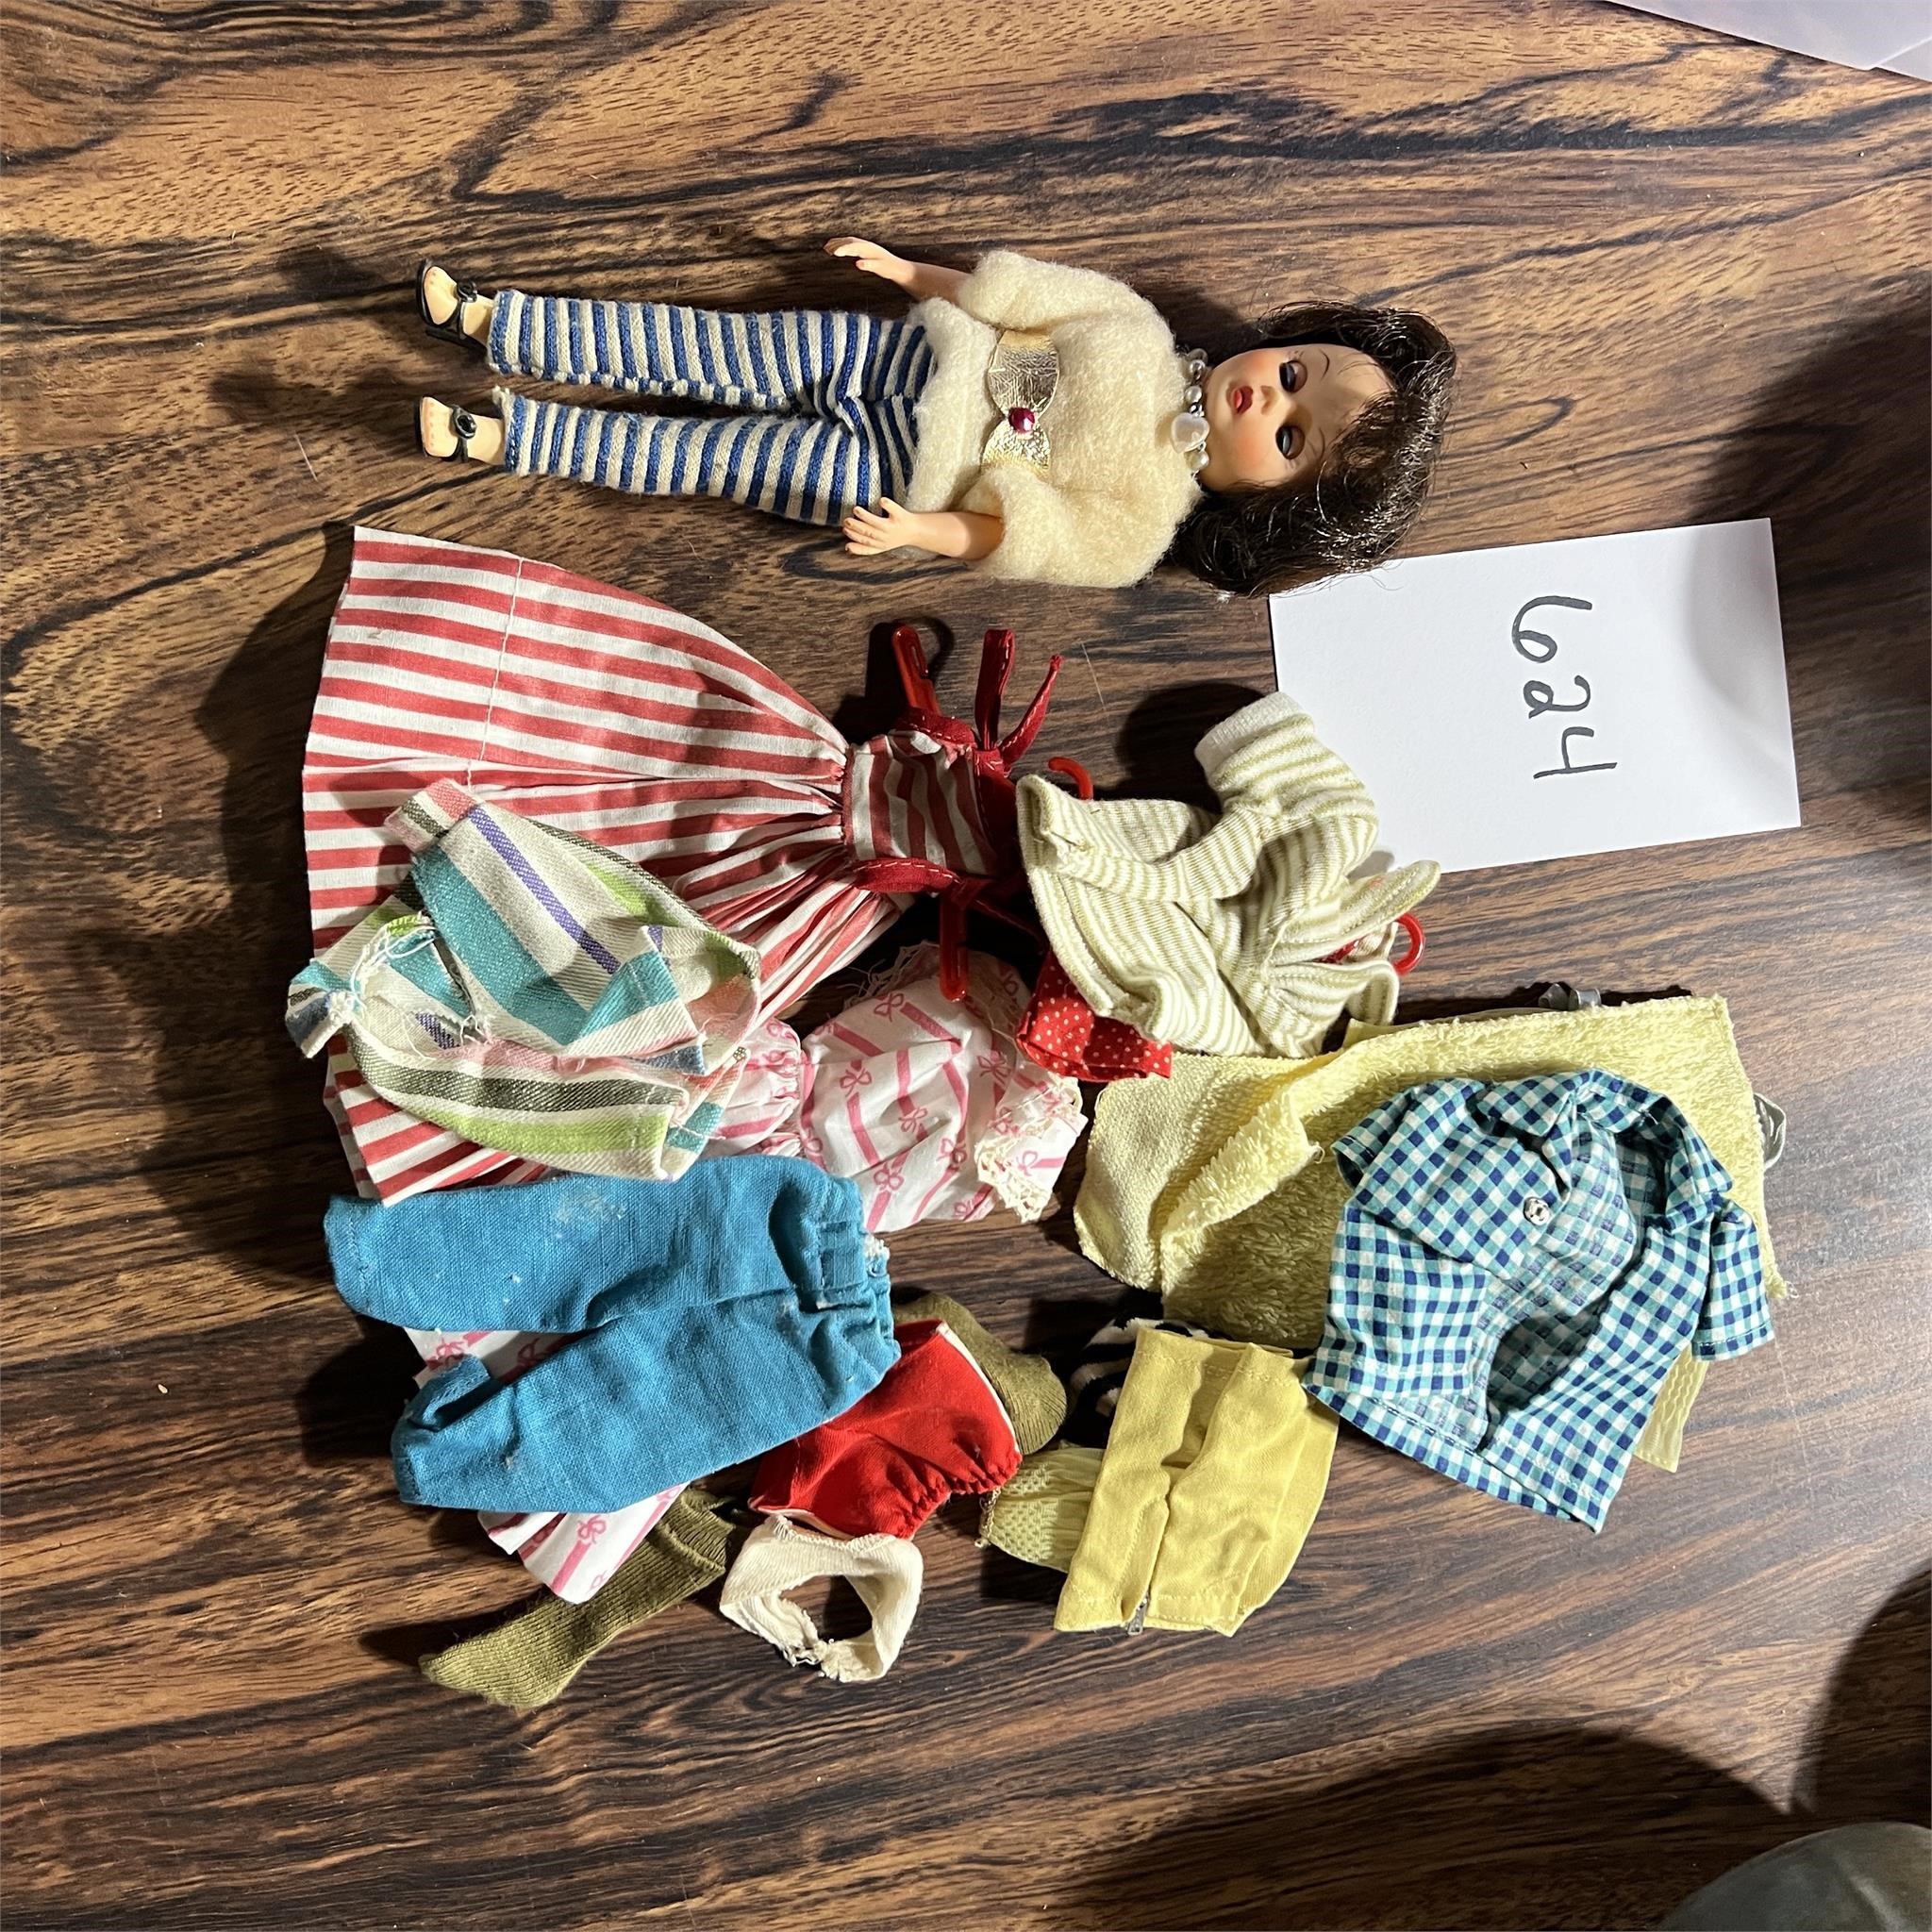 Vintage Doll and Clothing